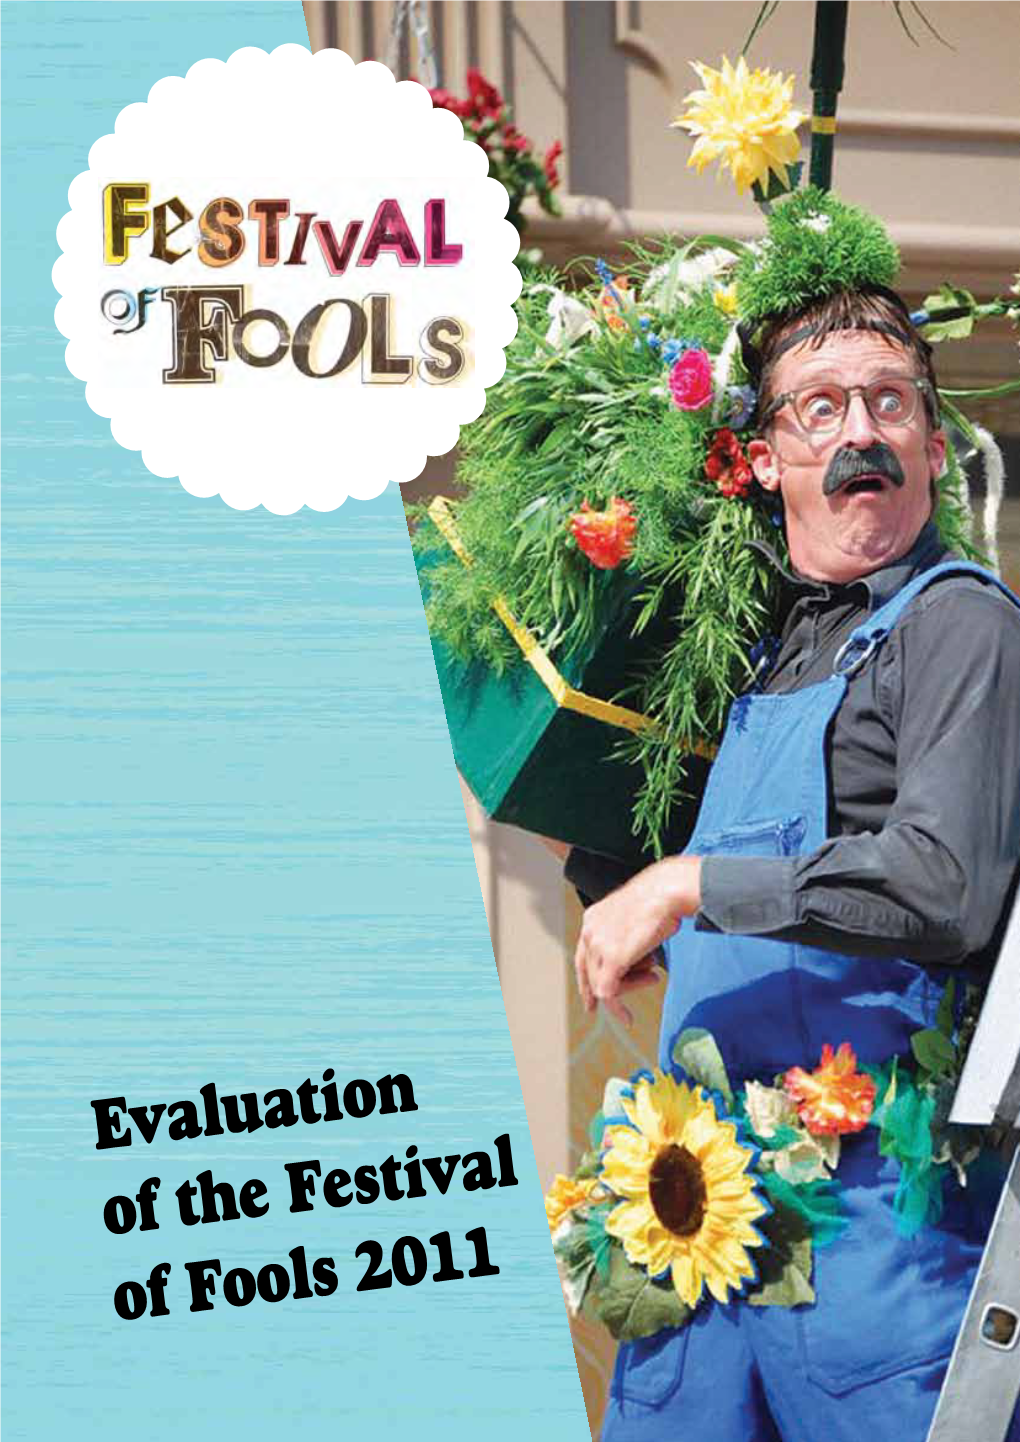 Evaluation of the Festival of Fools 2011